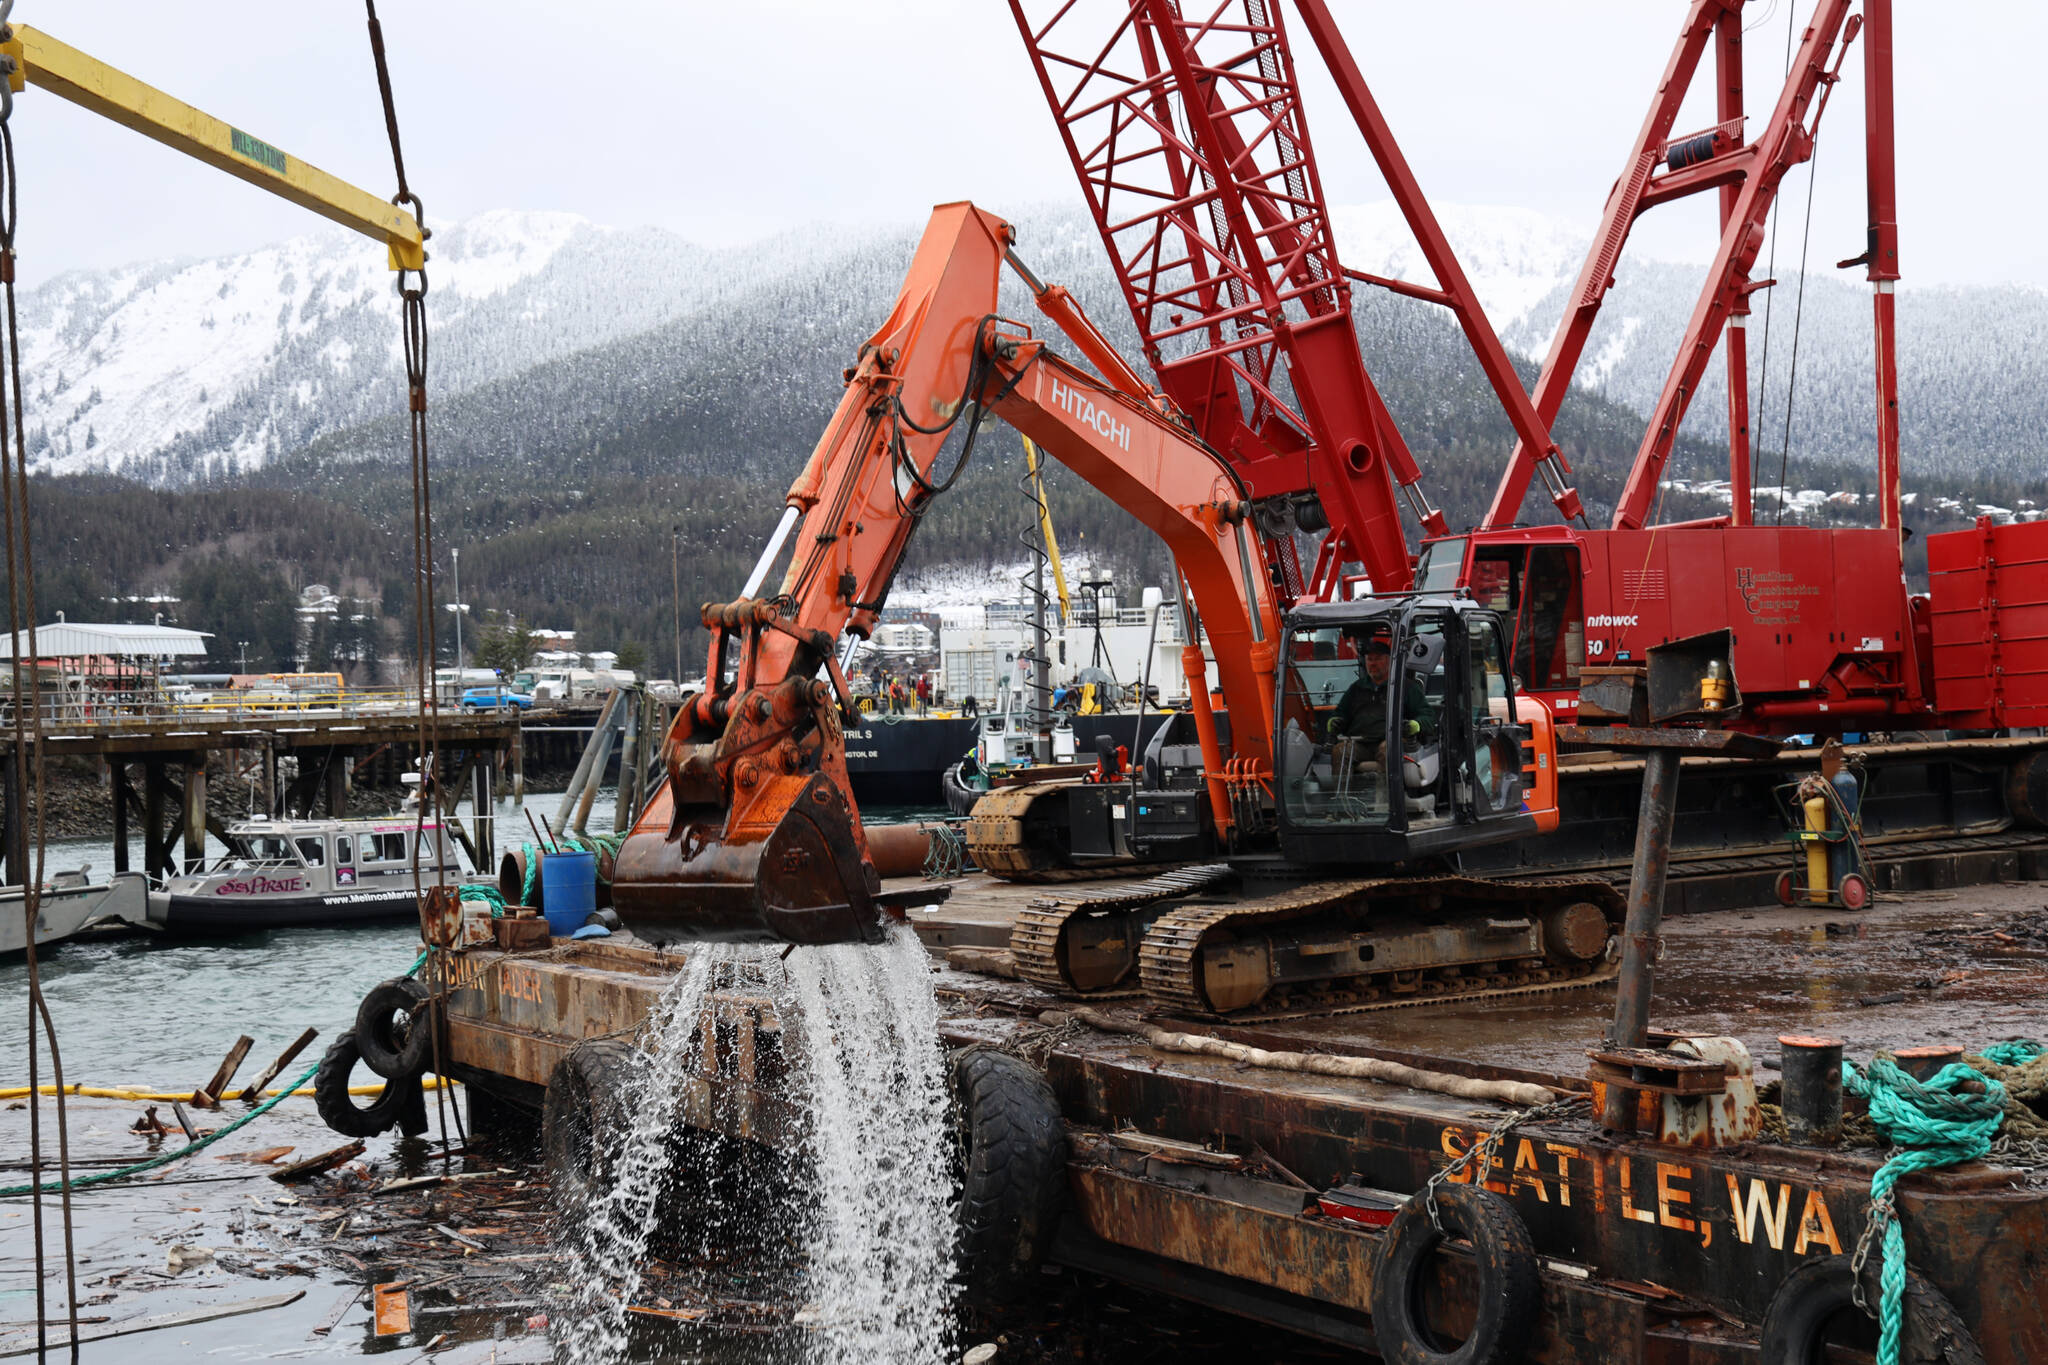 An excavator on a barge scoops floating debris near the shore of Gastineau Channel on Monday morning. The effort was a part of the recovery process of a 107-foot tugboat that sank at a dock south of the cruise ship docks in late December. (Clarise Larson / Juneau Empire)